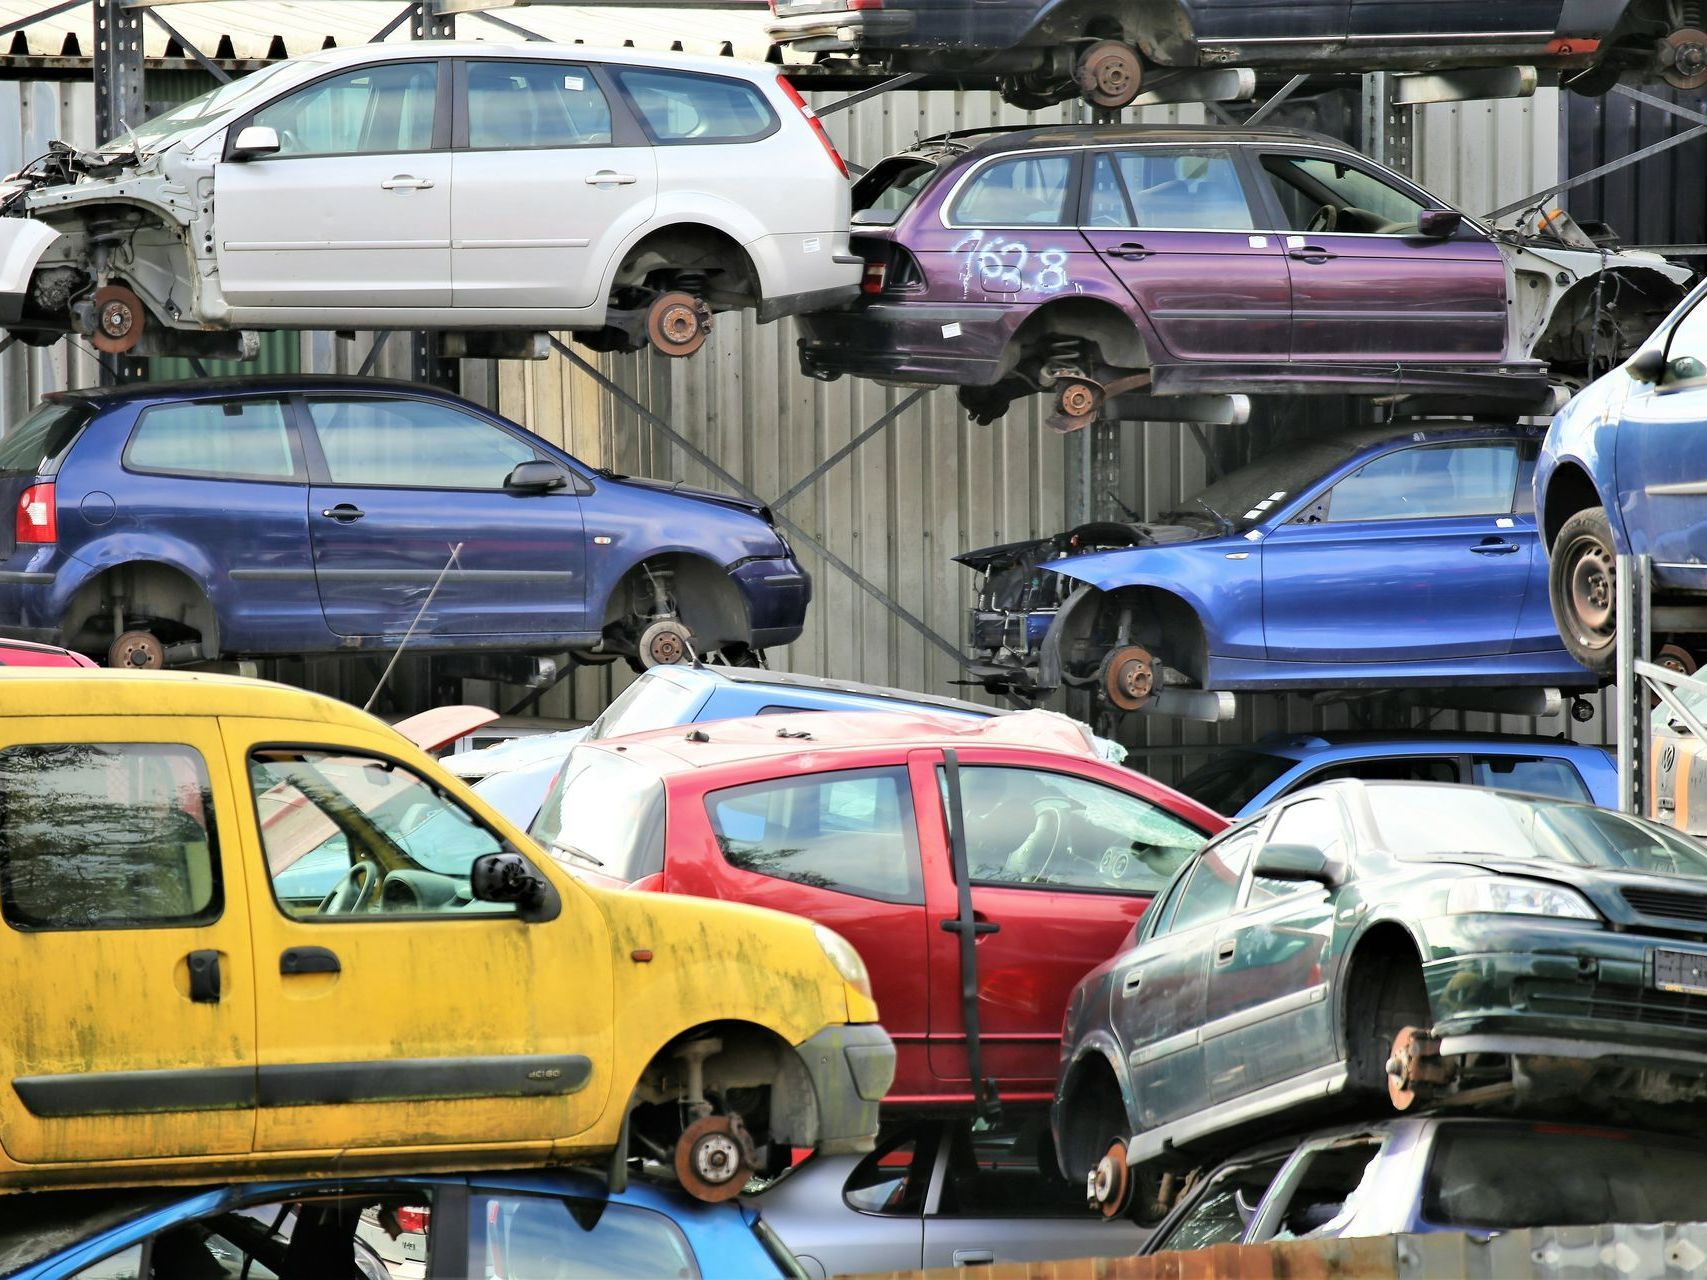 A bunch of cars are stacked on top of each other in a junkyard.